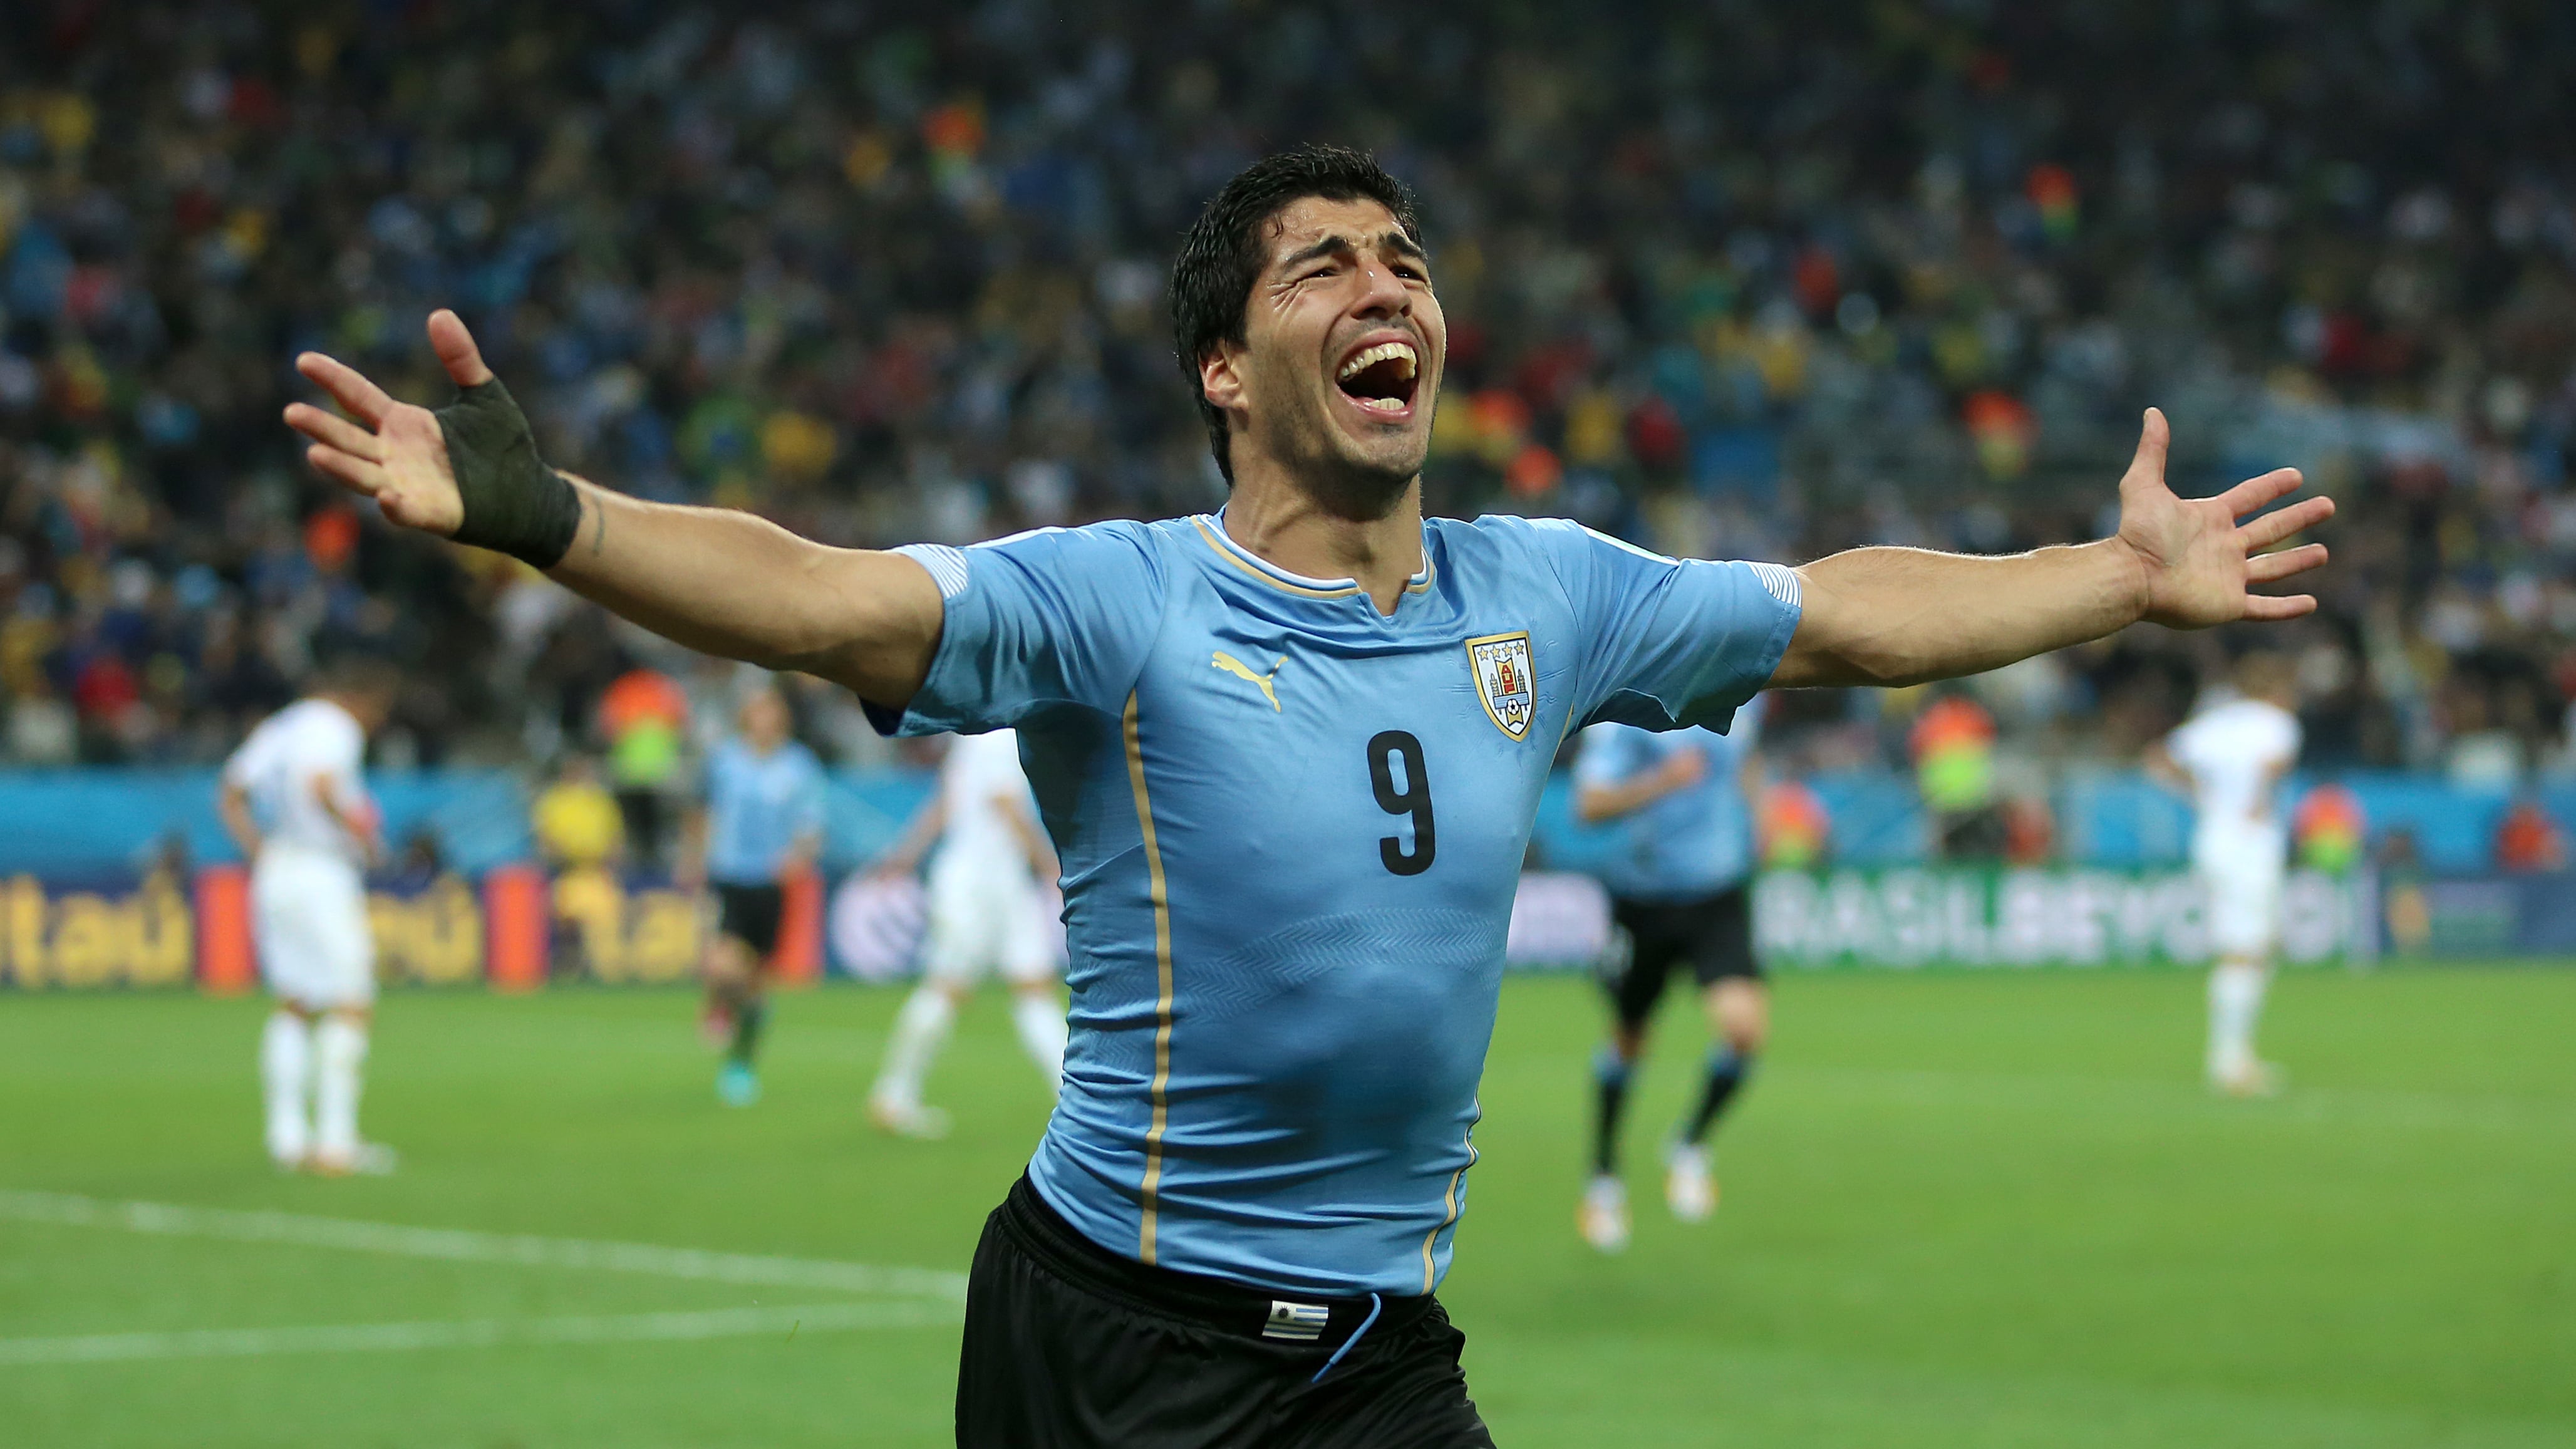 Luis Suarez scored twice as Uruguay left England on the brink of elimination from the 2014 World Cup